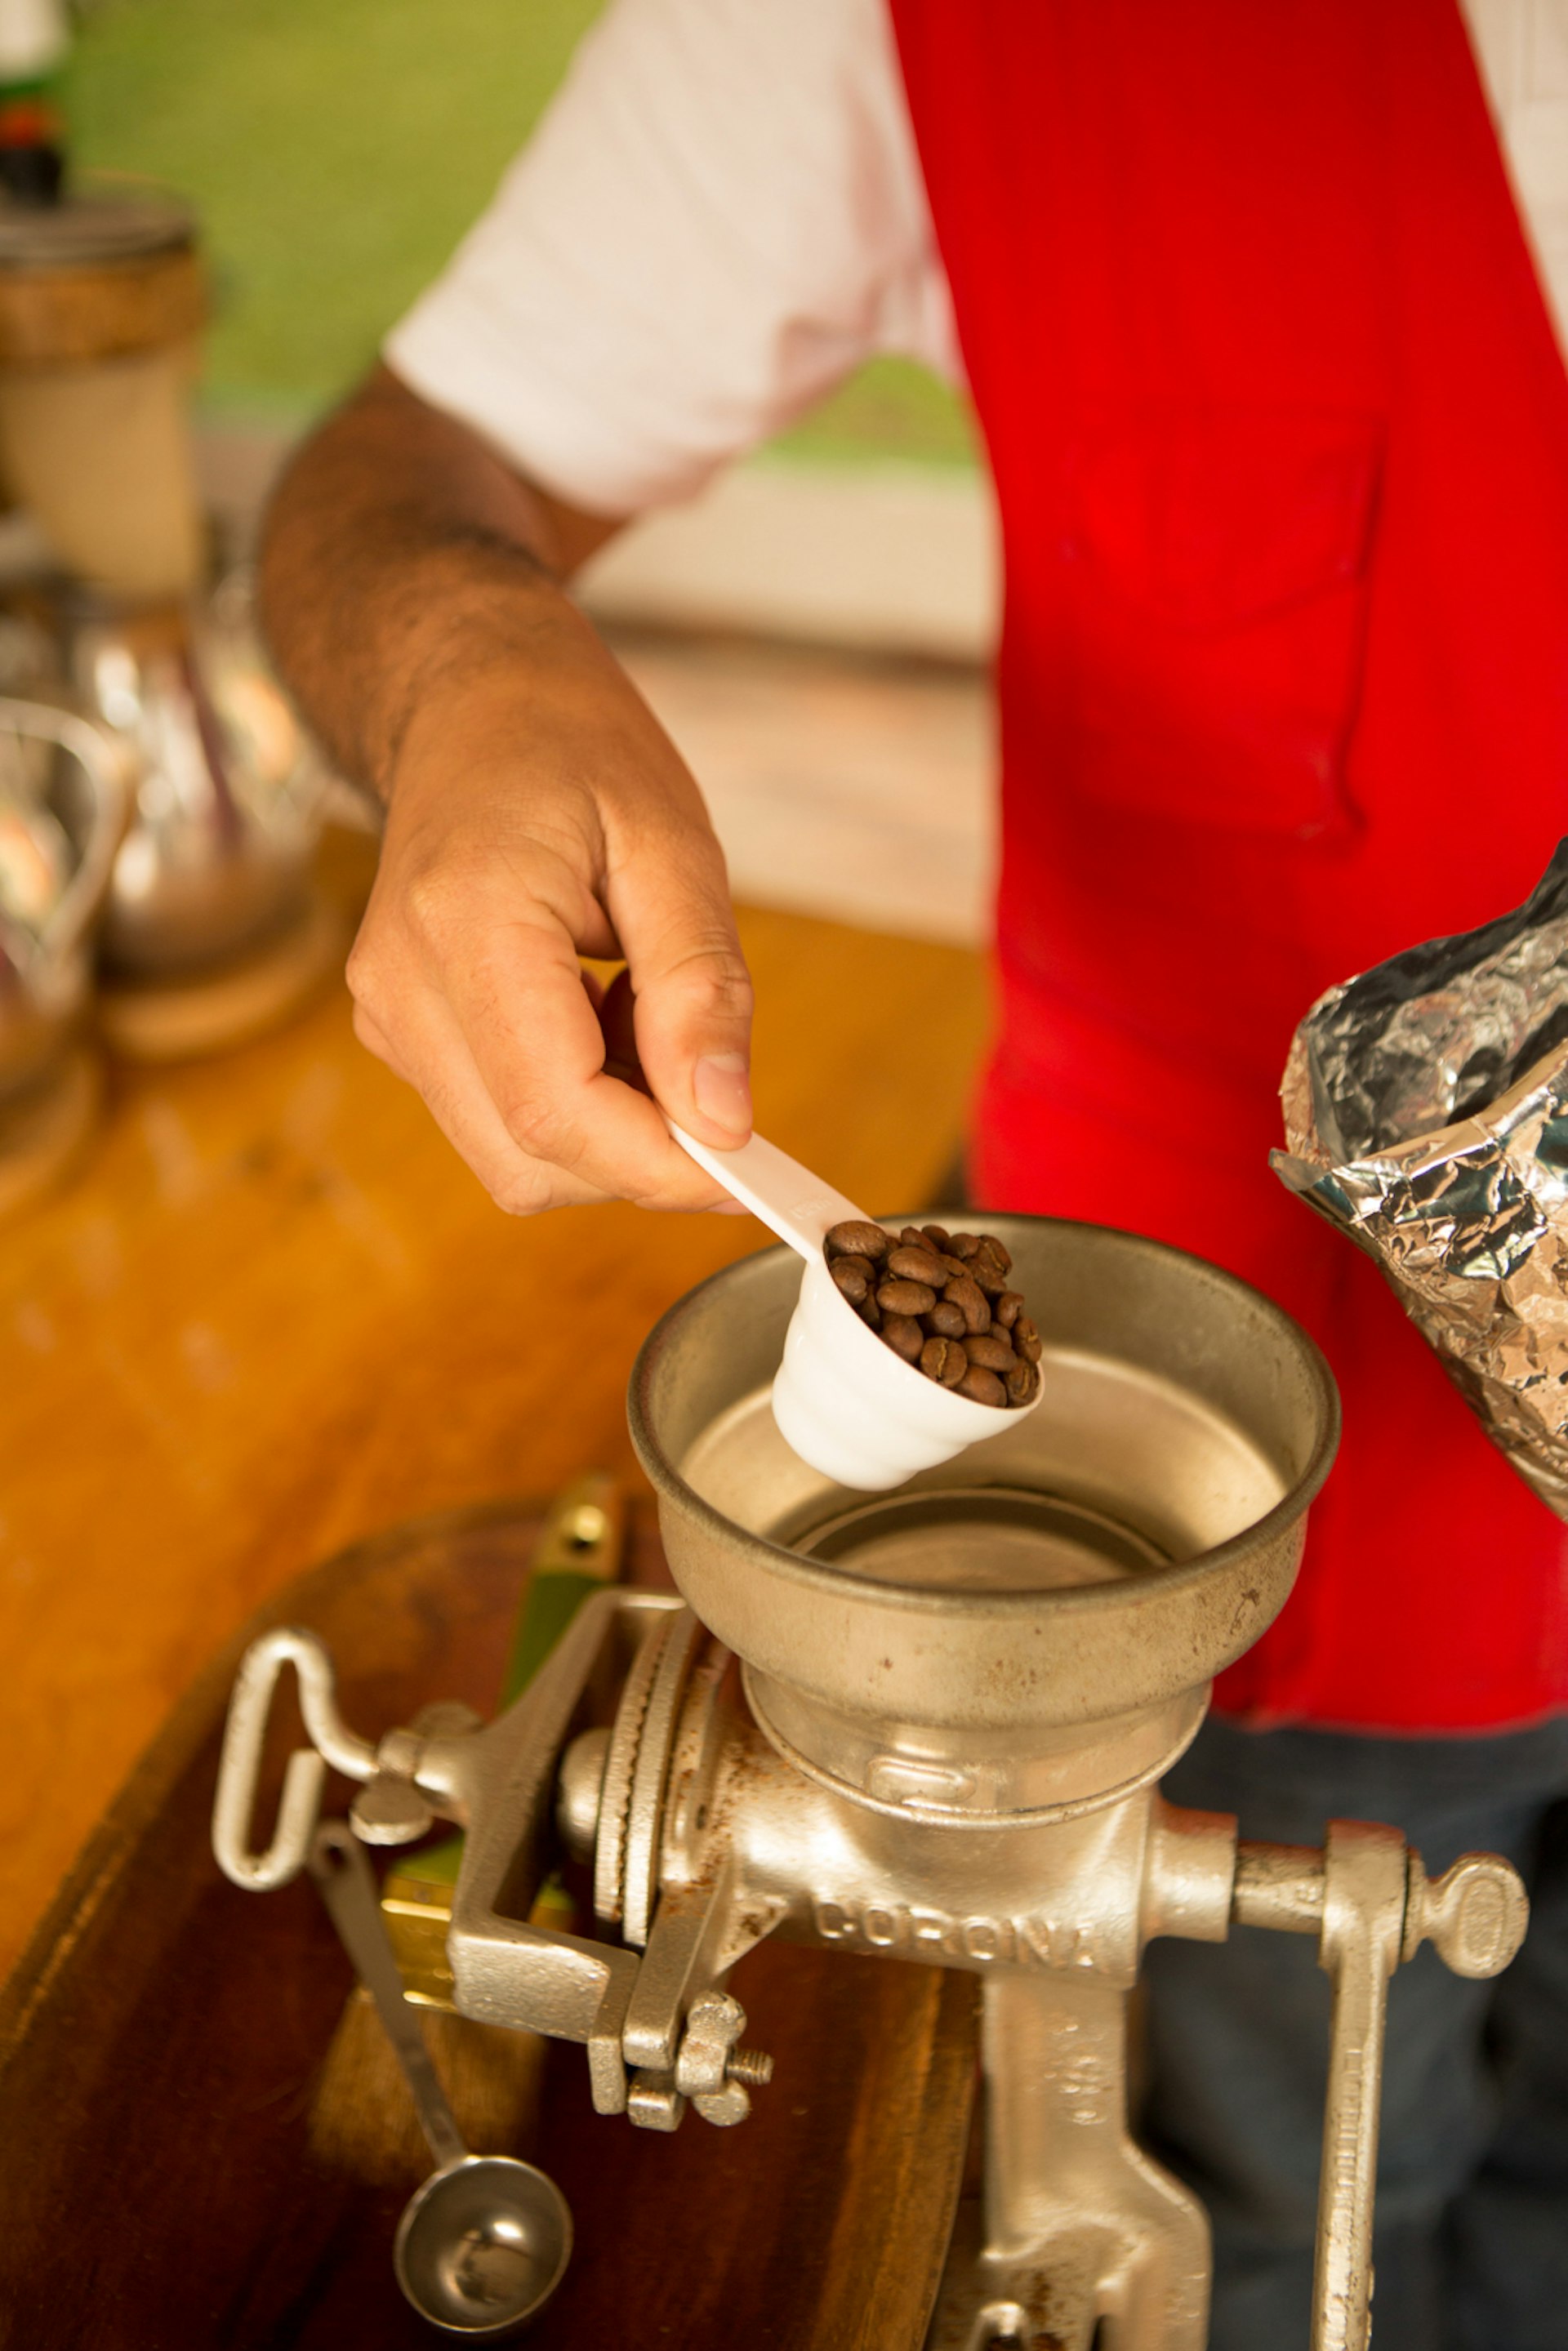 A person pours a tablespoon of coffee beans into a metal coffee grinder to make fresh Colombian coffee. They are wearing a white t-shirt and red vest, the photo is a close up so we can only see their arm and torso.